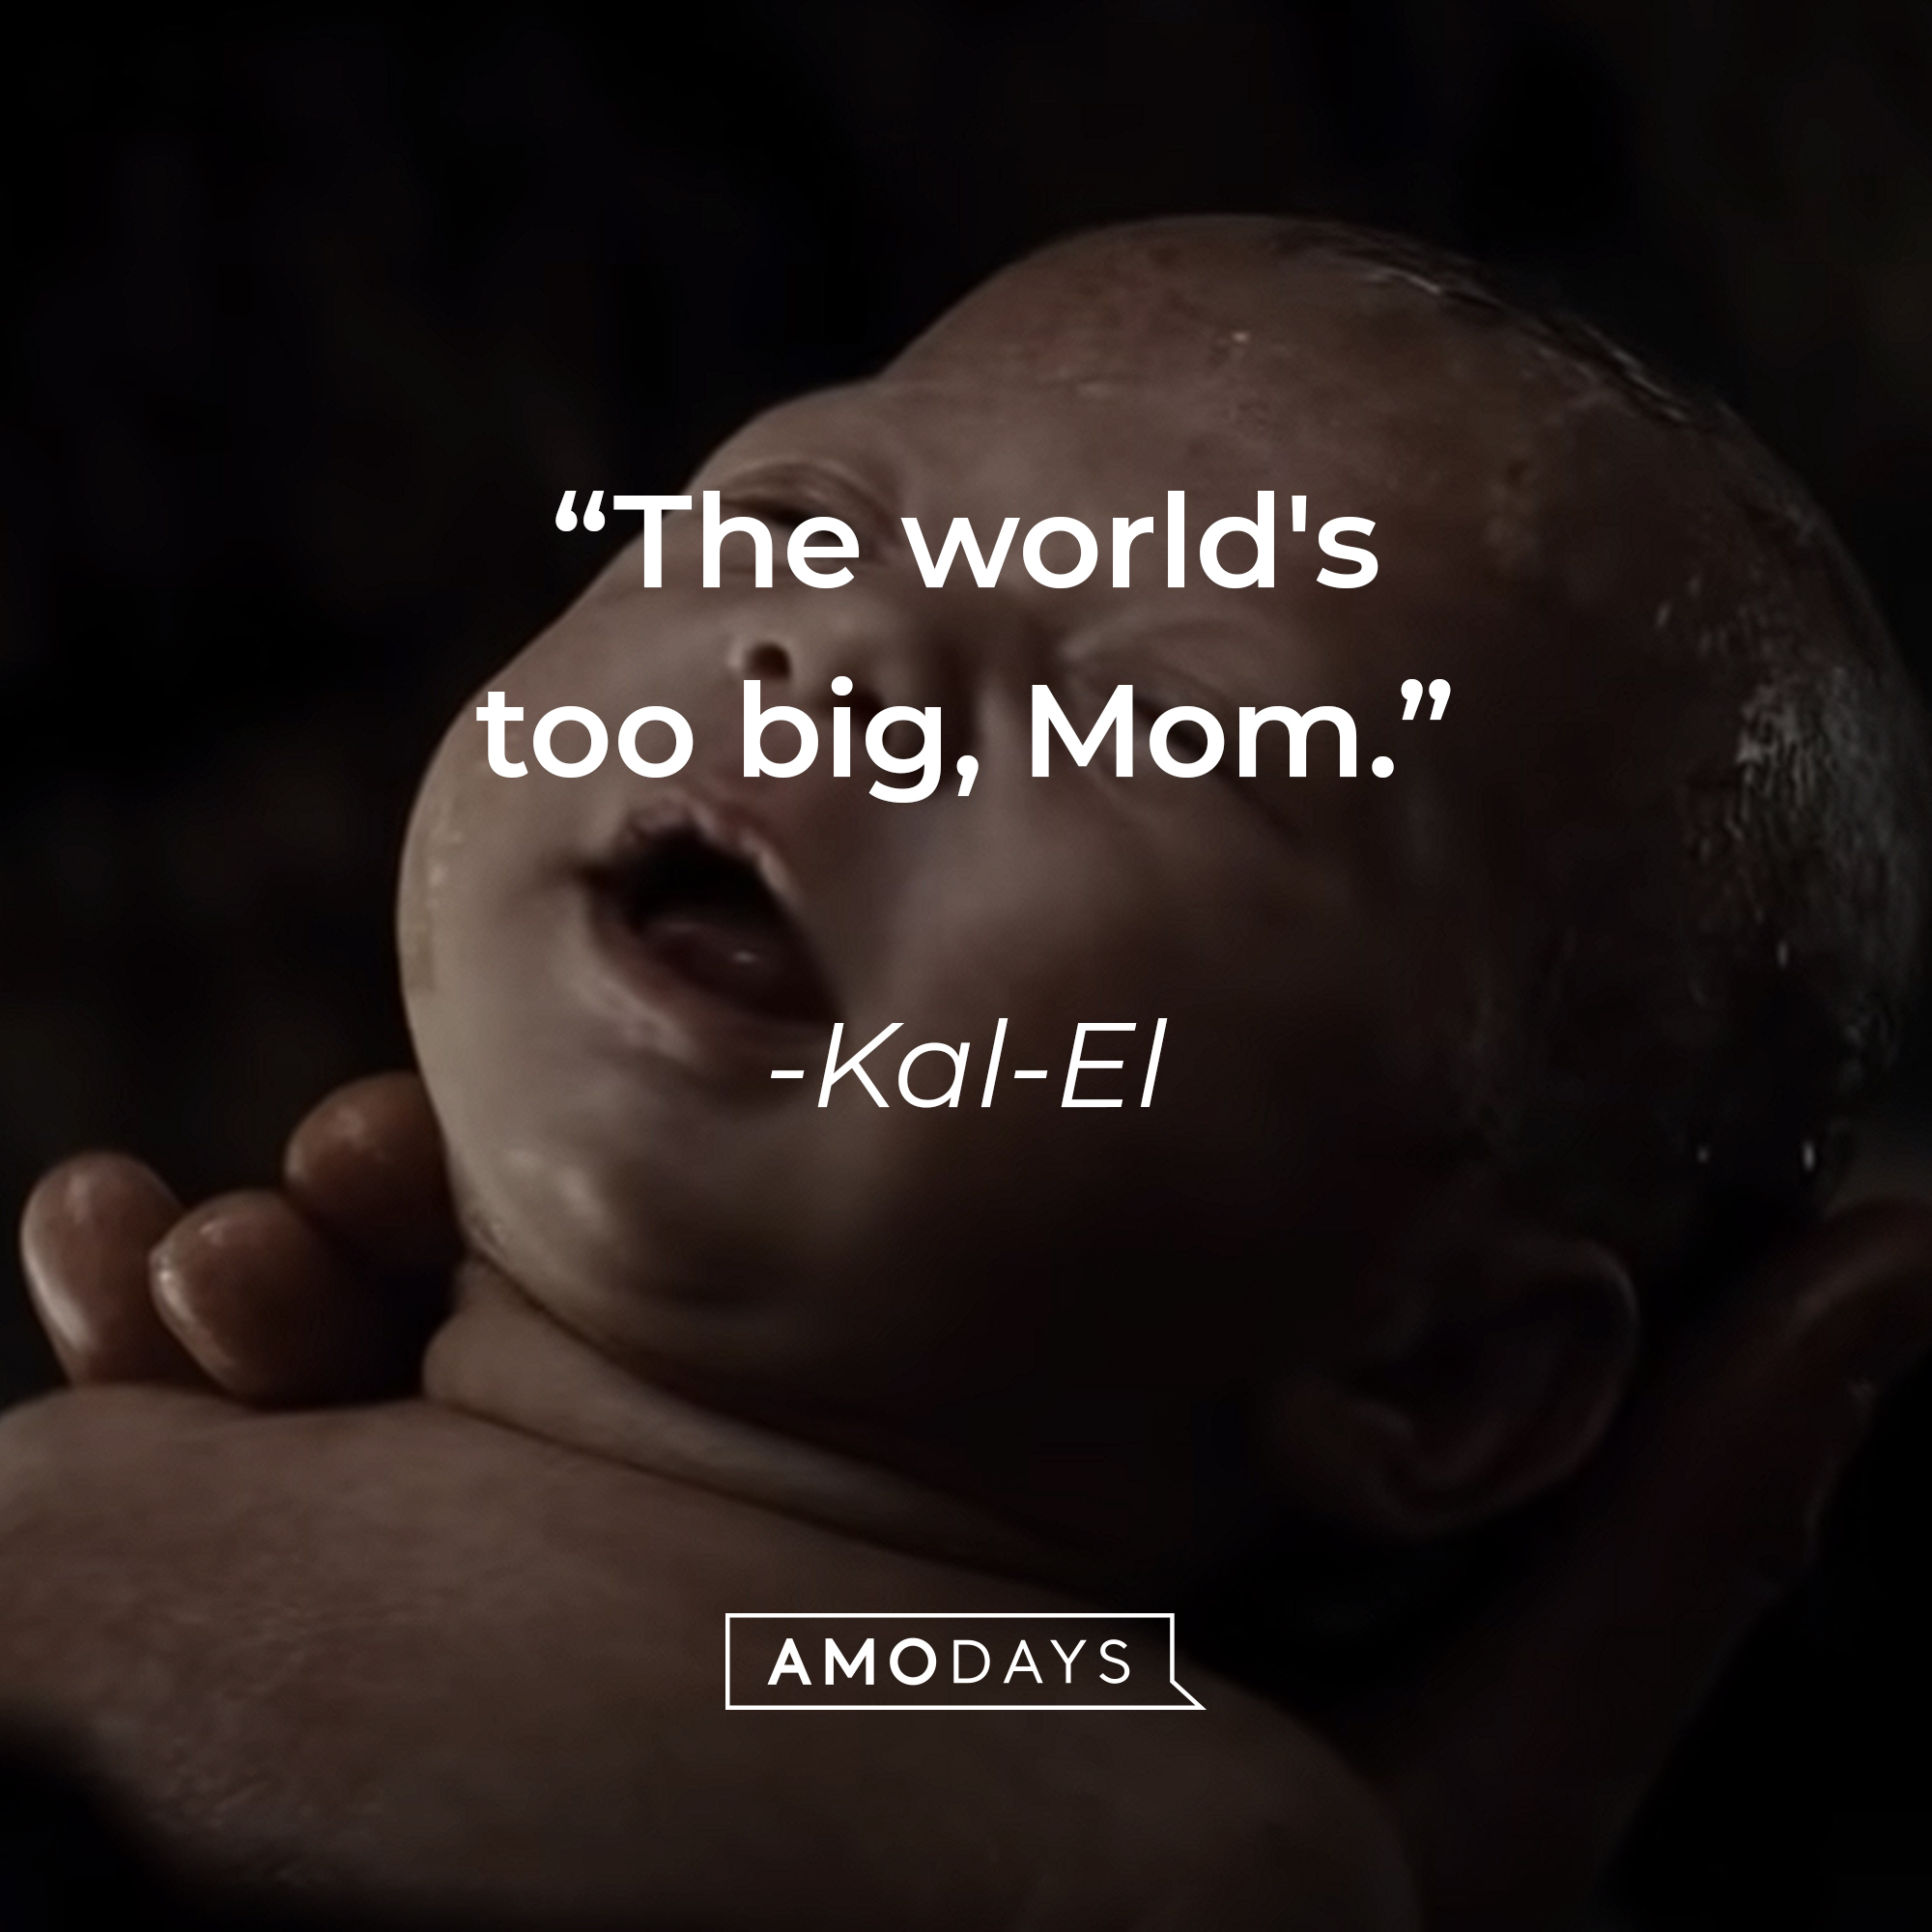 Kal-El's quote: "The world's too big, Mom." | Source: Youtube.com/WarnerBrosPictures